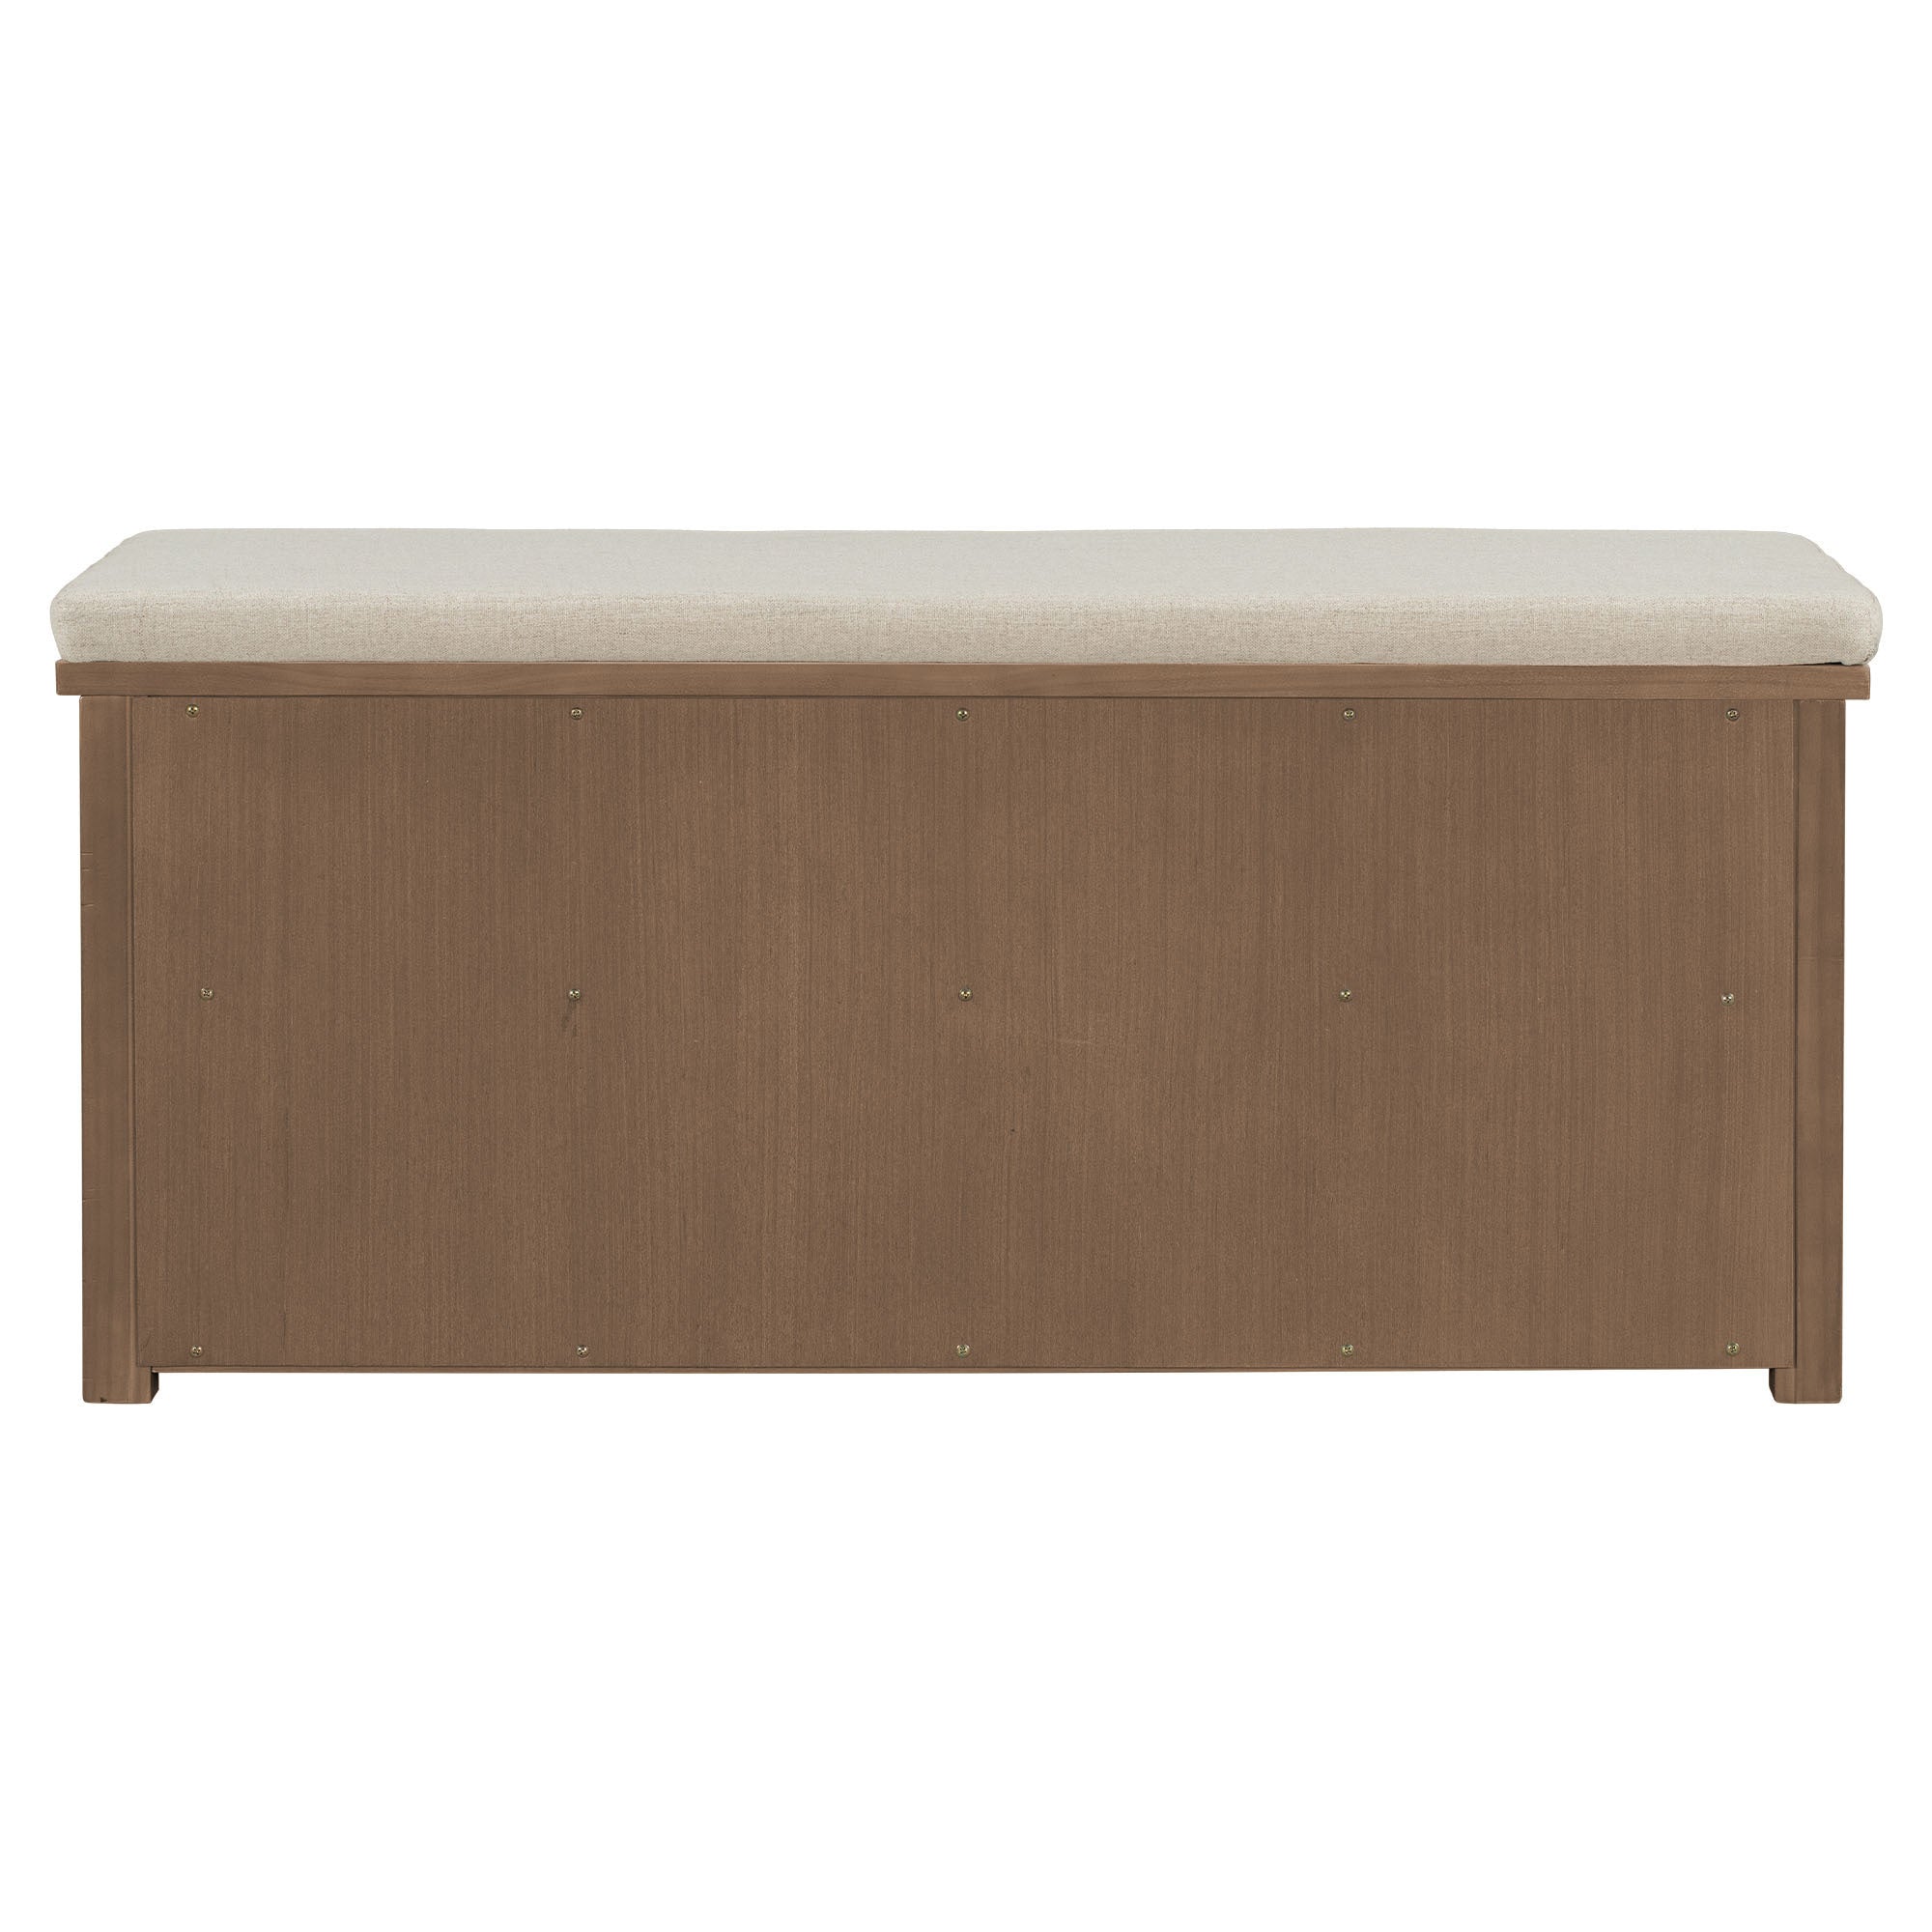 42" Storage Seating Bench with Two Door, Brown Pine color